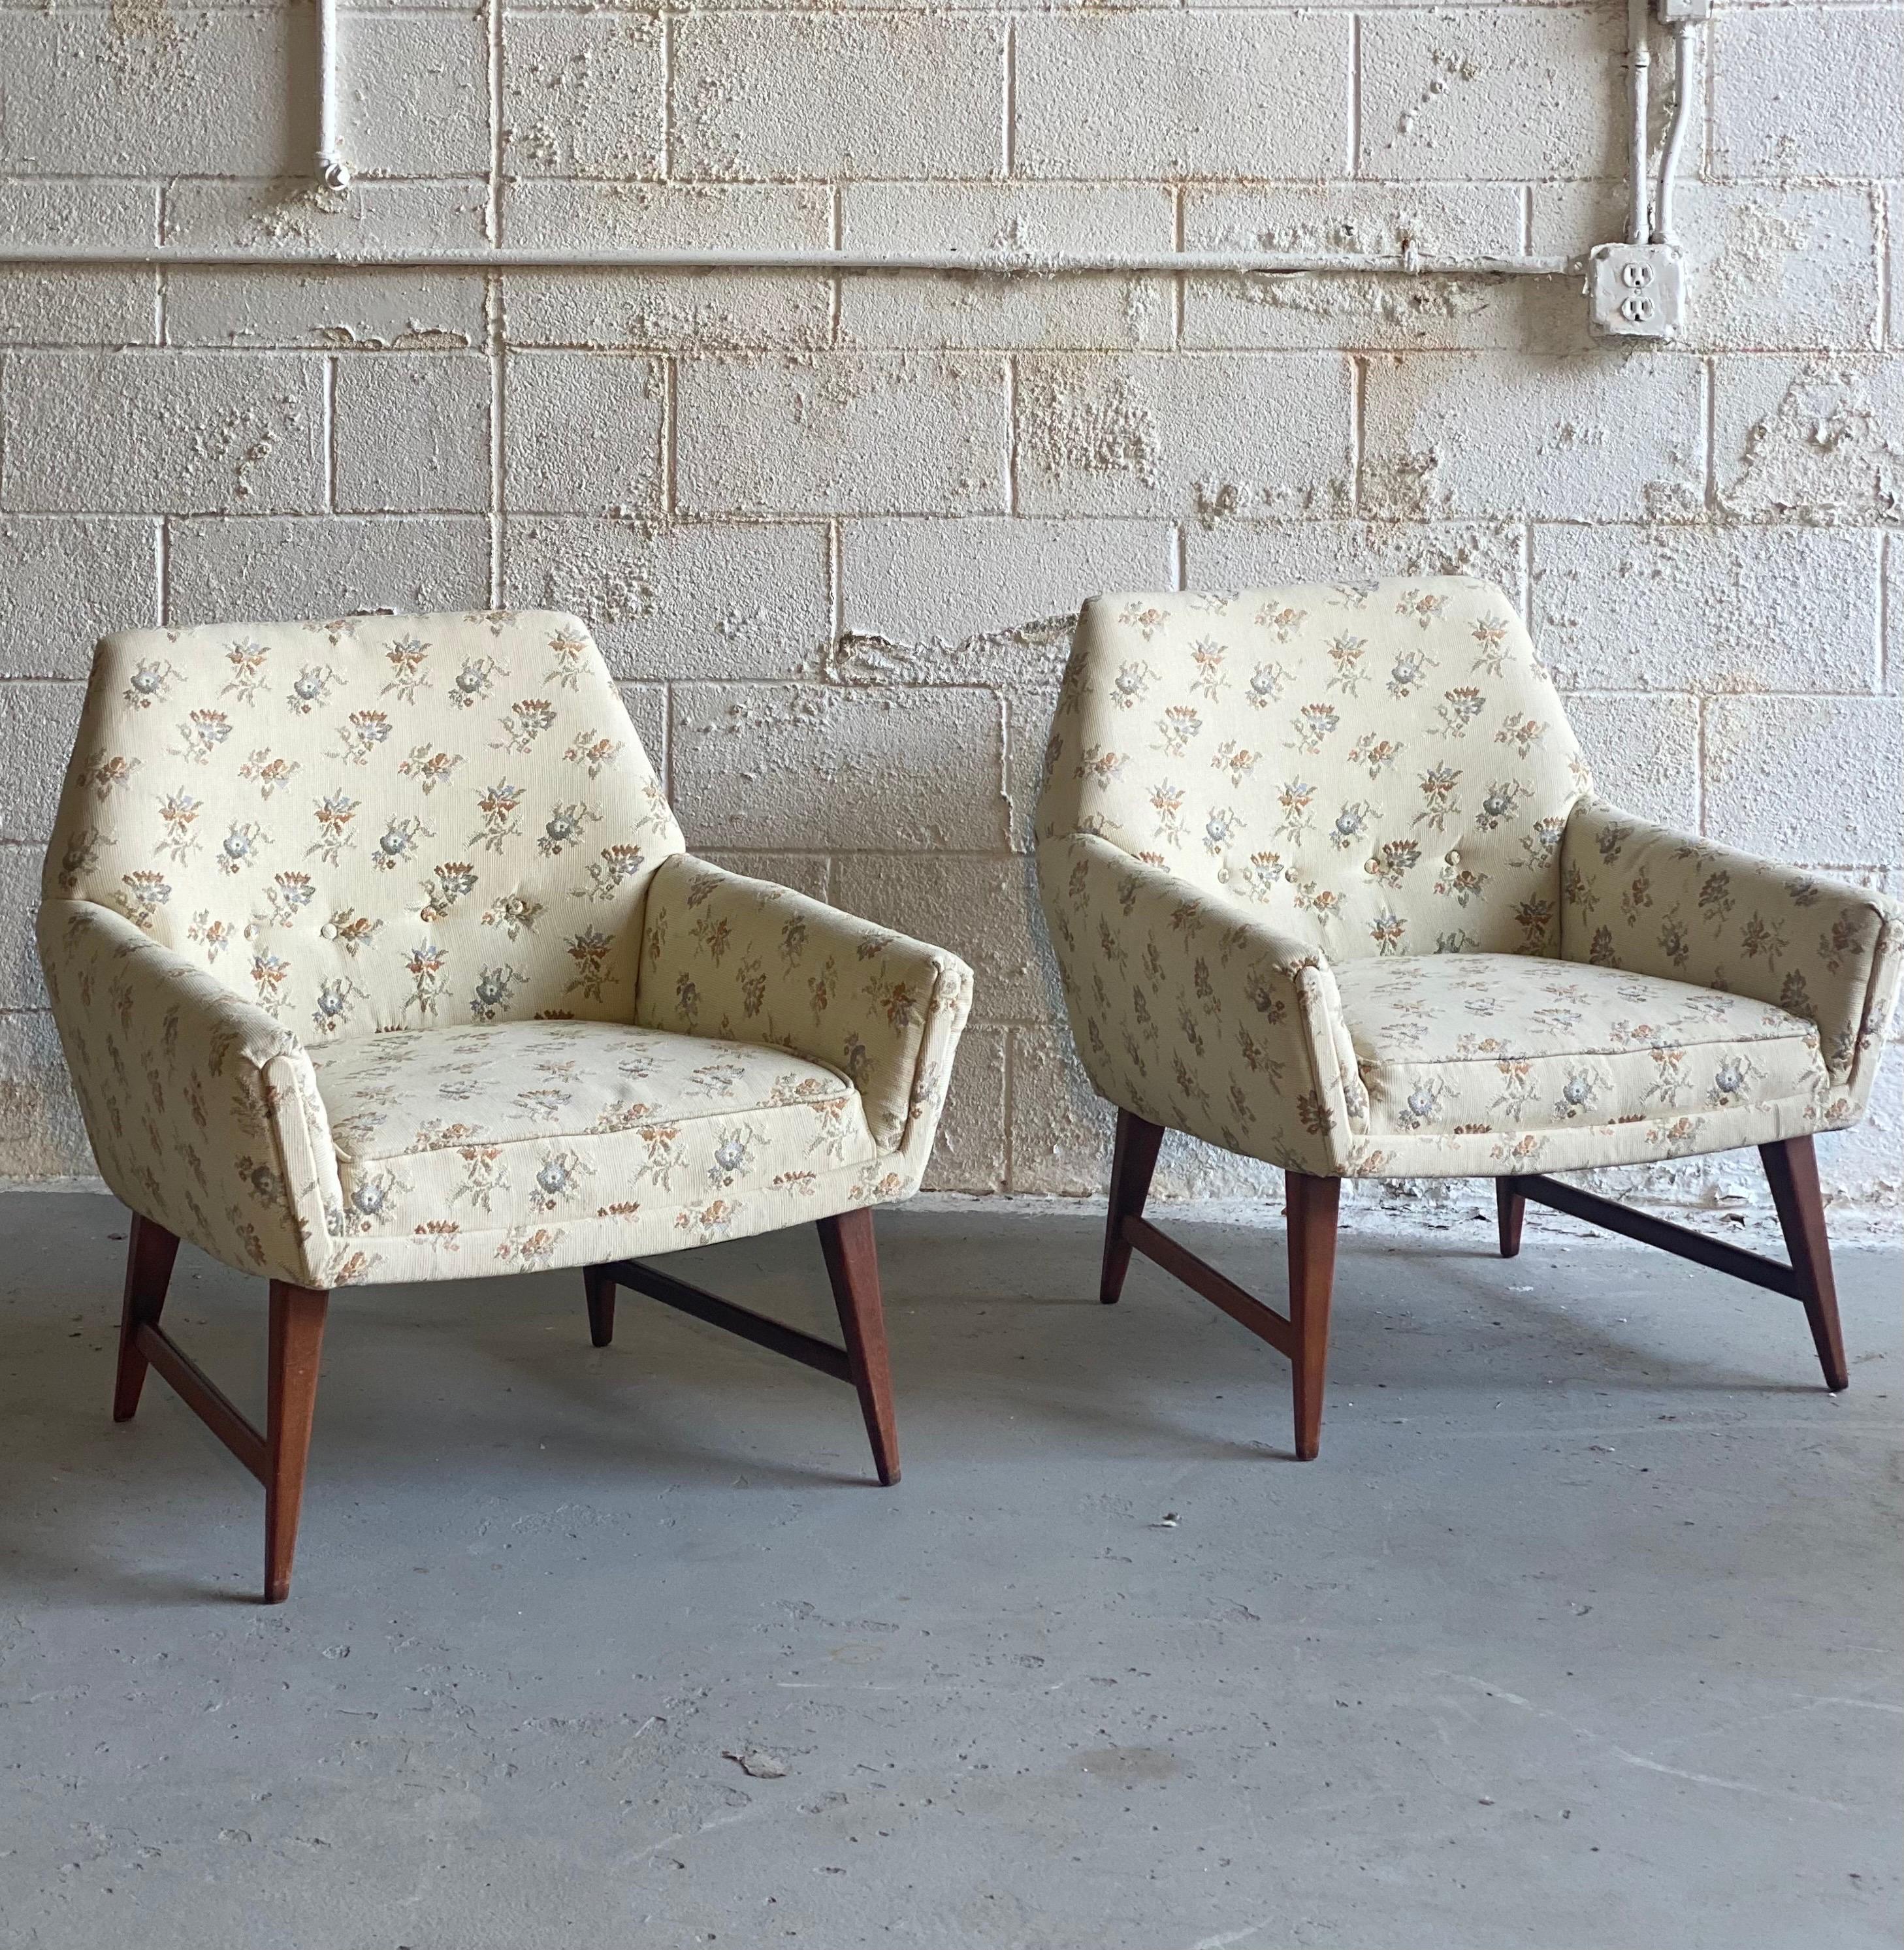 We are very pleased to offer a beautiful, Mid-Century Modern pair of chairs, circa the 1960s. True to its Scandinavian aesthetic, this pair is characterized by its simplicity and functionality. Clean lines are notorious in its wraparound upholstered